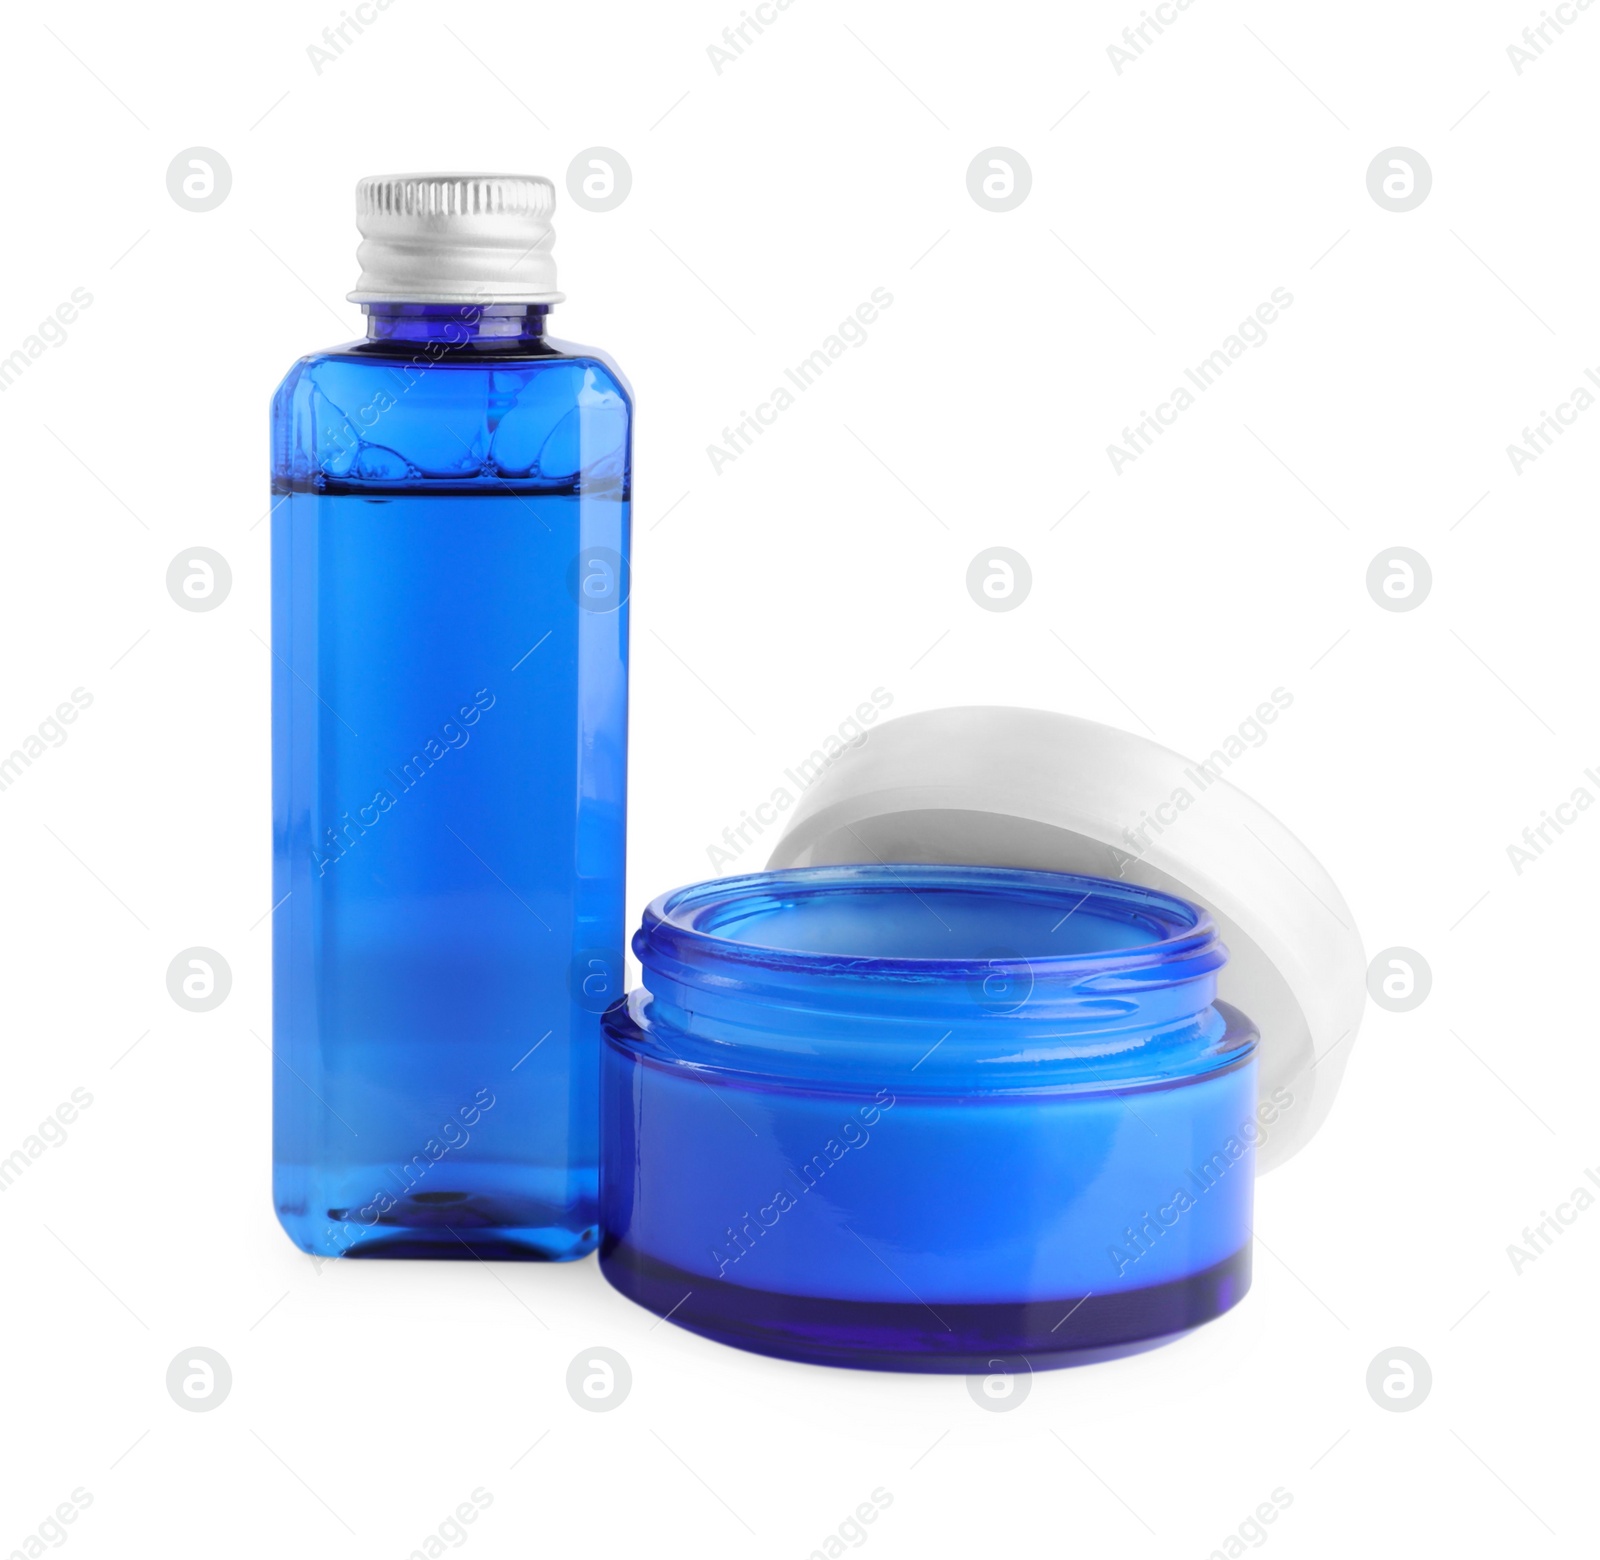 Photo of Jar and bottle of cosmetic products isolated on white